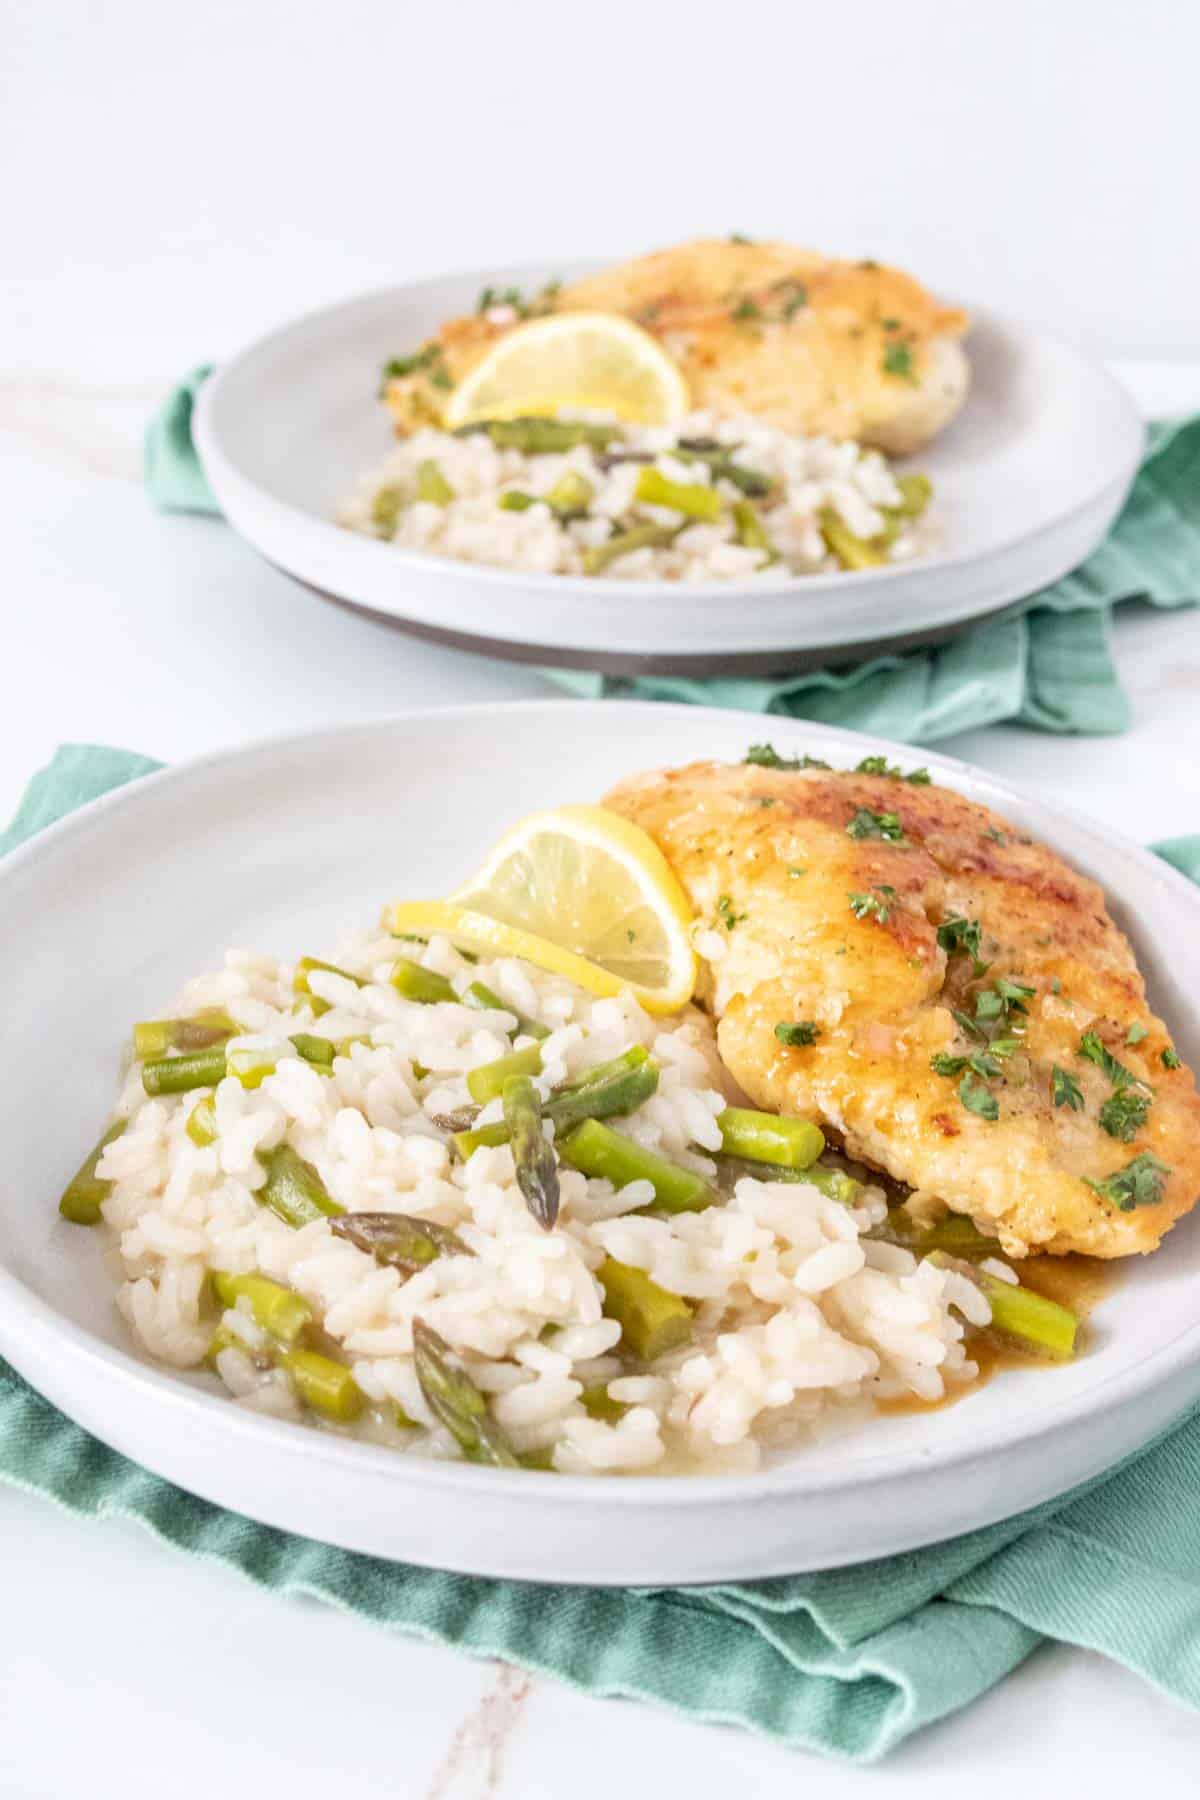 Two plates of asparagus risotto and chicken with lemon.